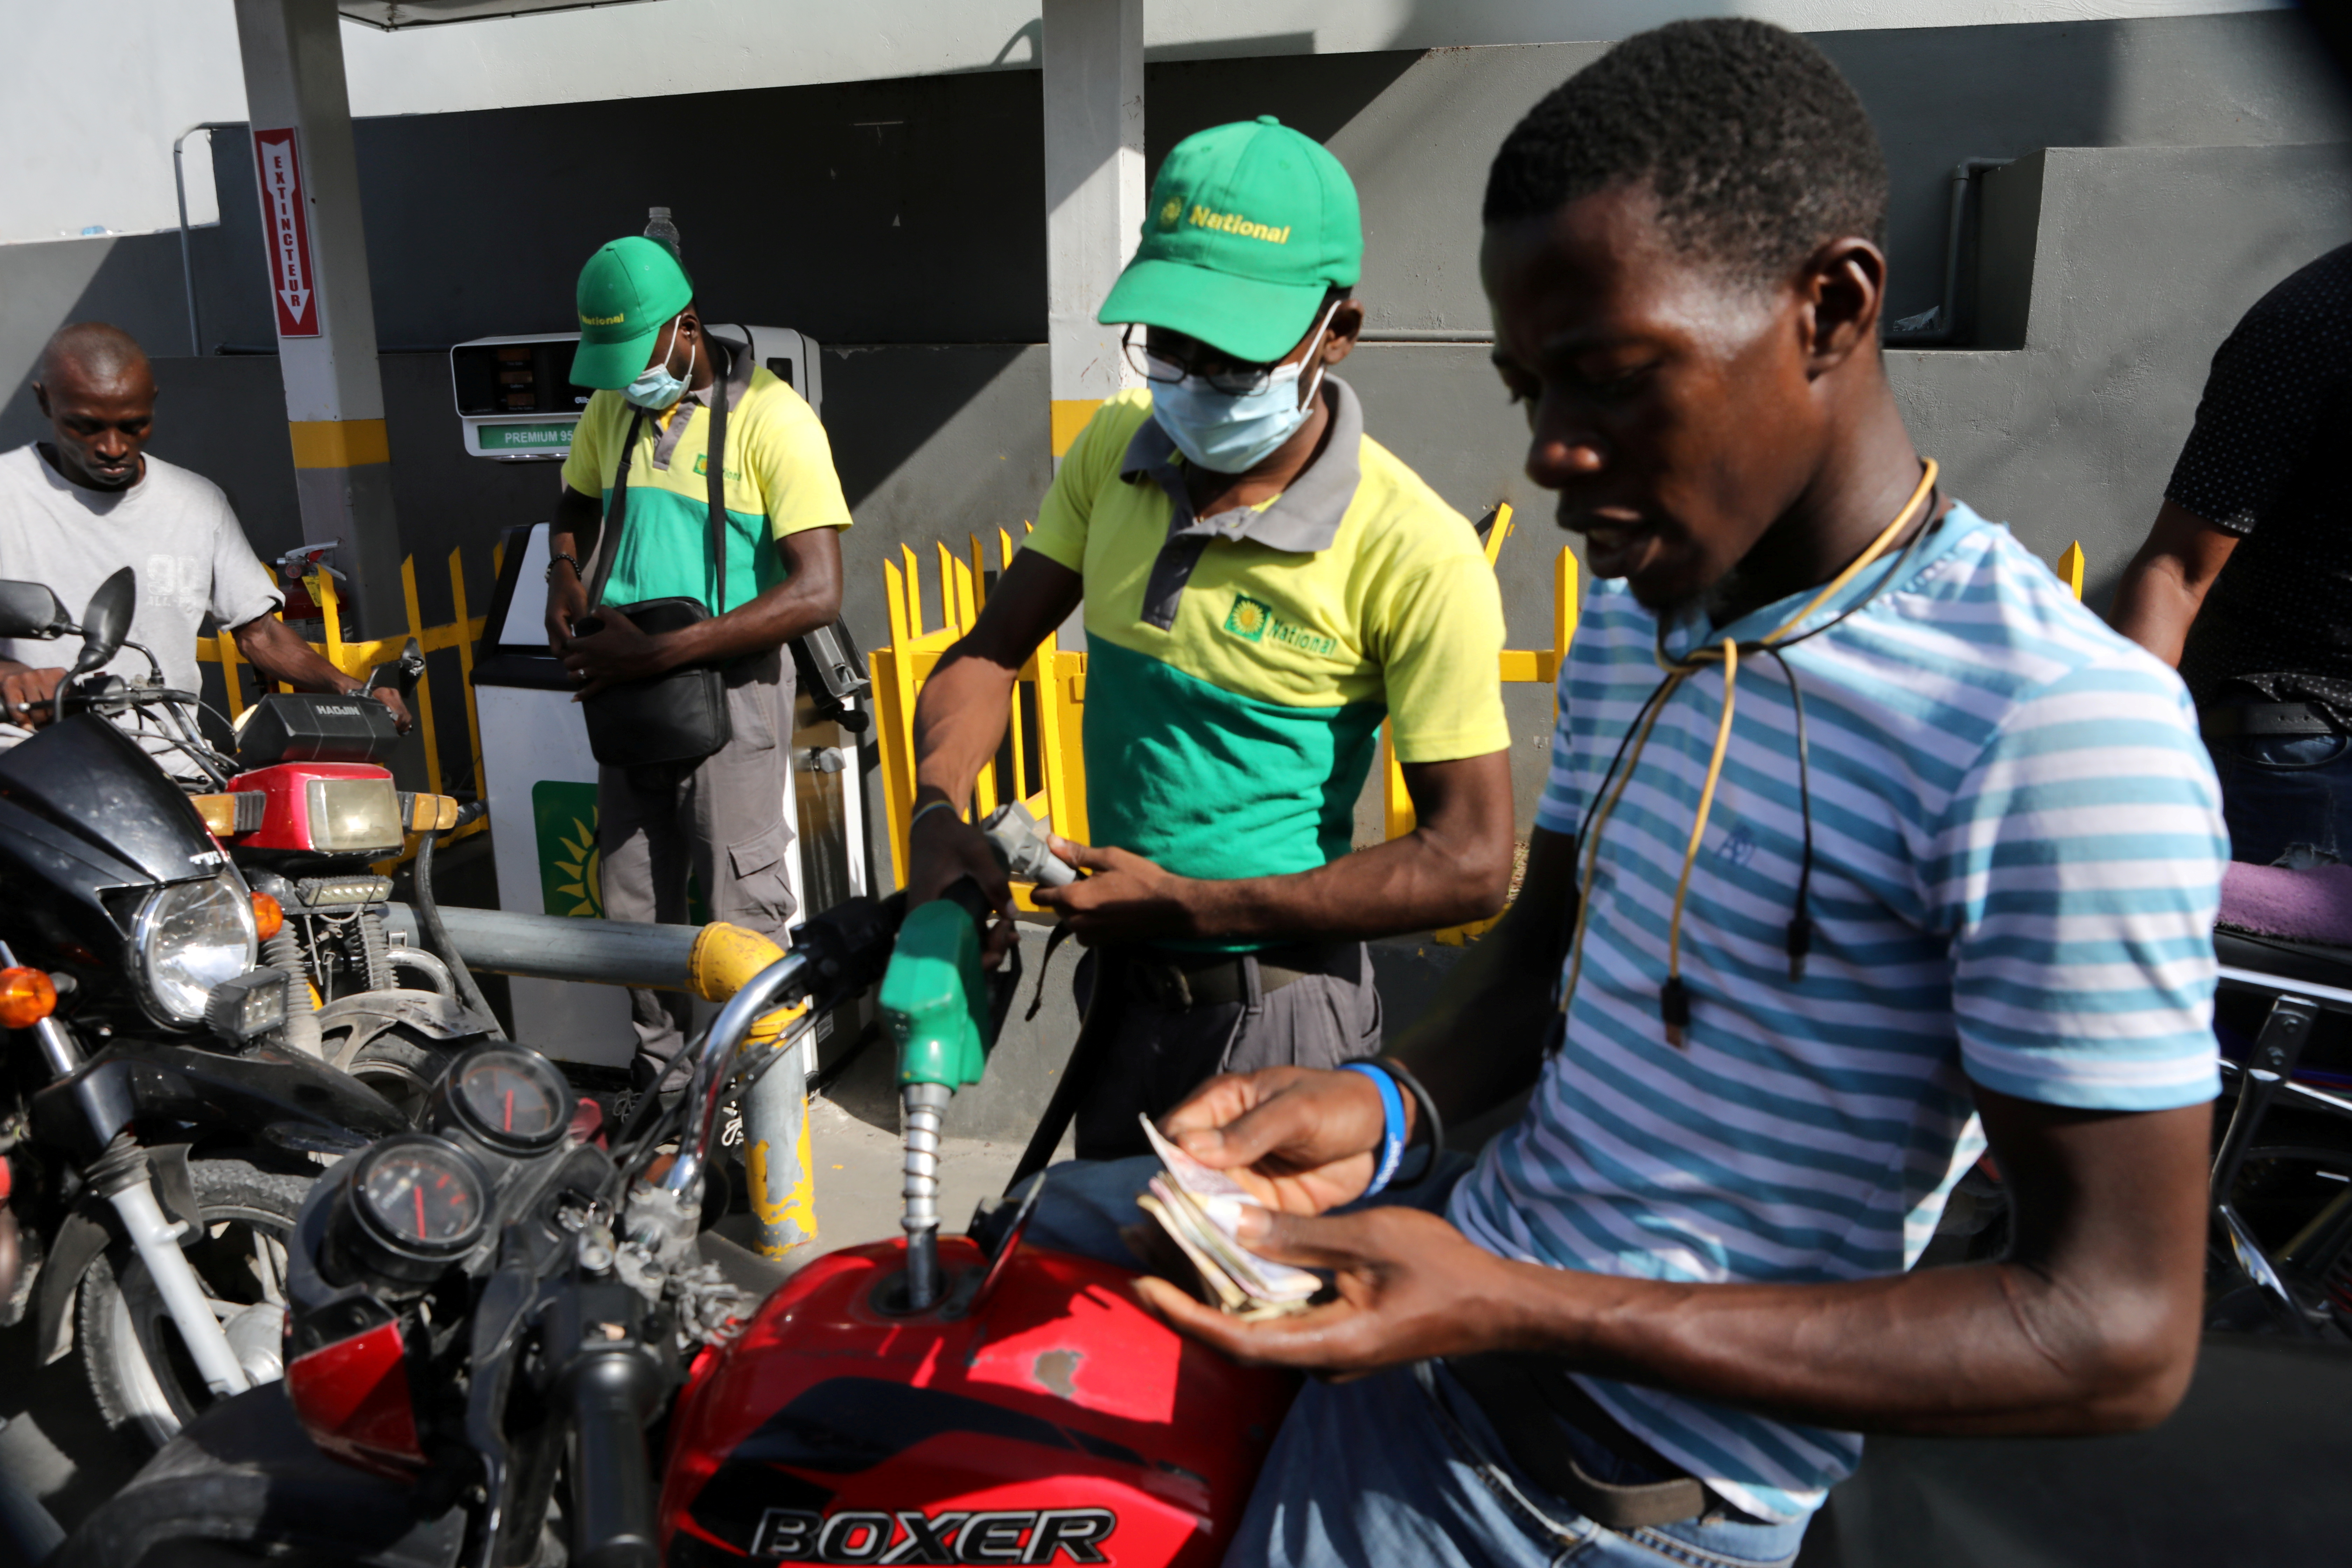 Haitian gangs temporarily lift a blockade leading to fuel shortages